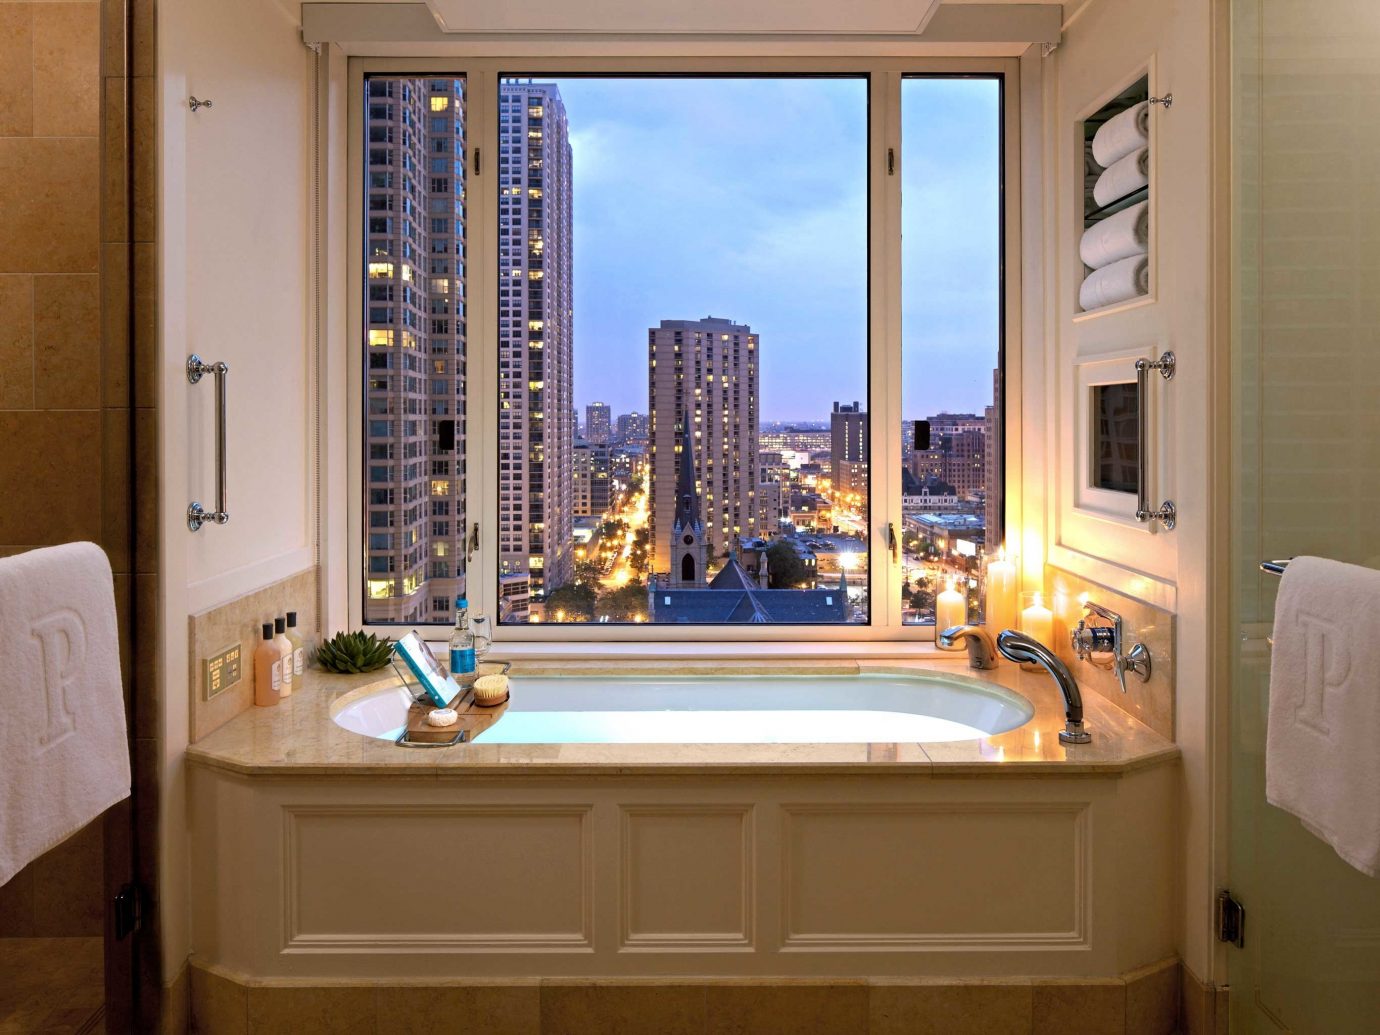 Bath City Hotels Scenic views wall indoor window bathroom room property estate home house interior design floor mansion Suite real estate swimming pool Design cottage apartment Kitchen living room